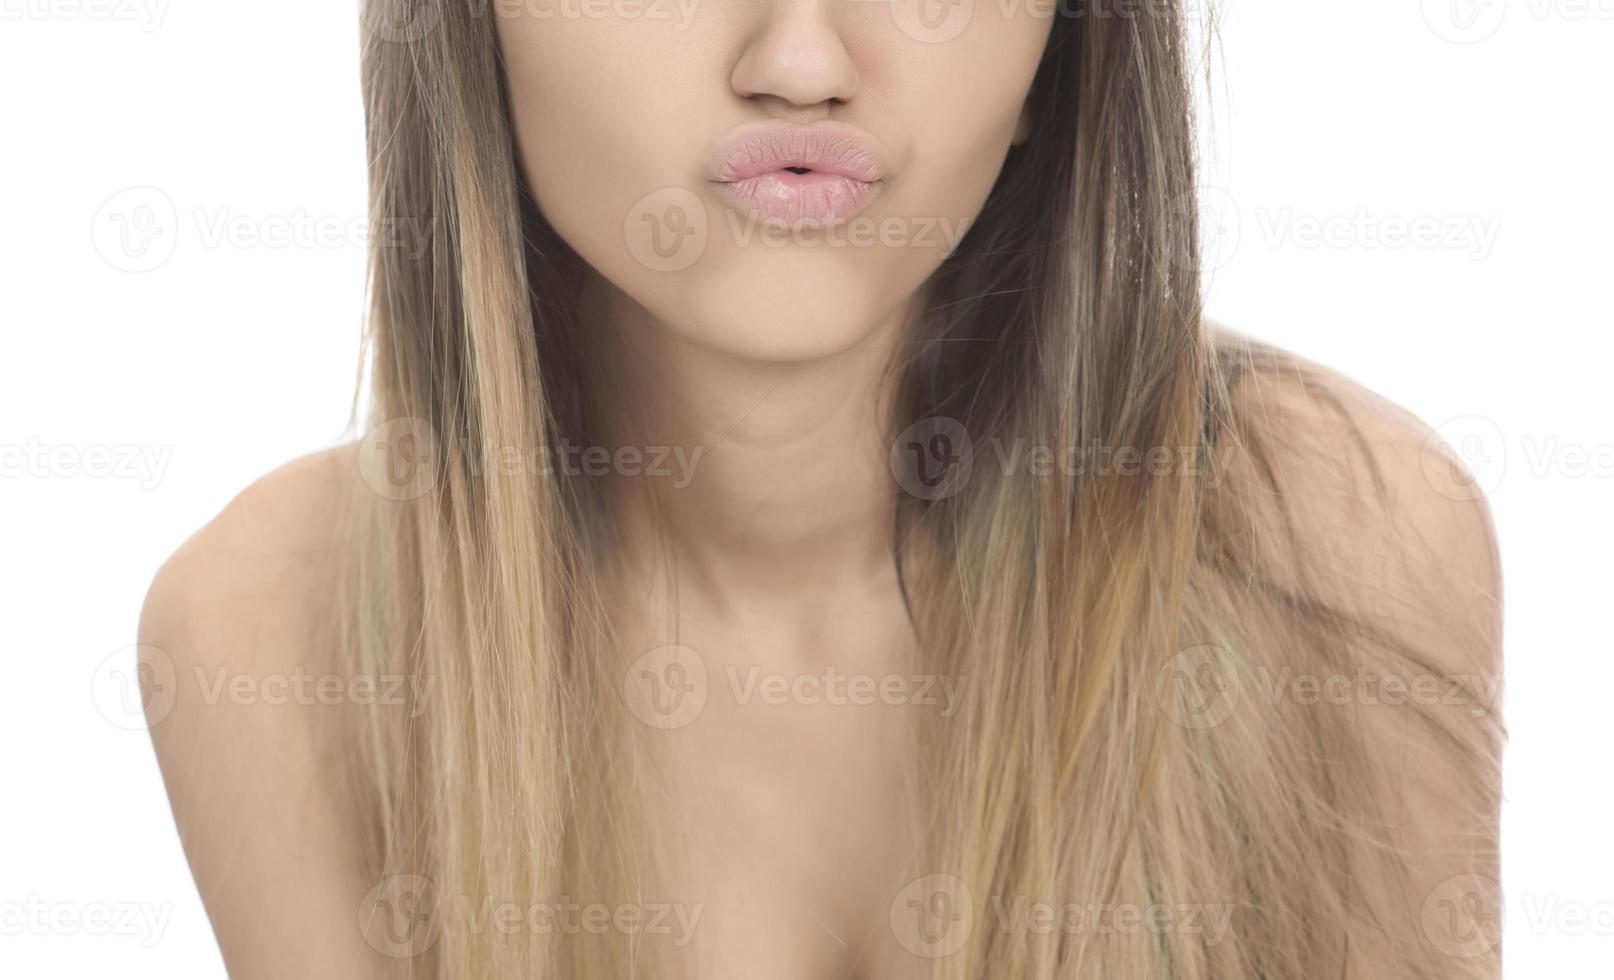 funny female model over white background crosses eyes and makes fish lips funny grimace photo